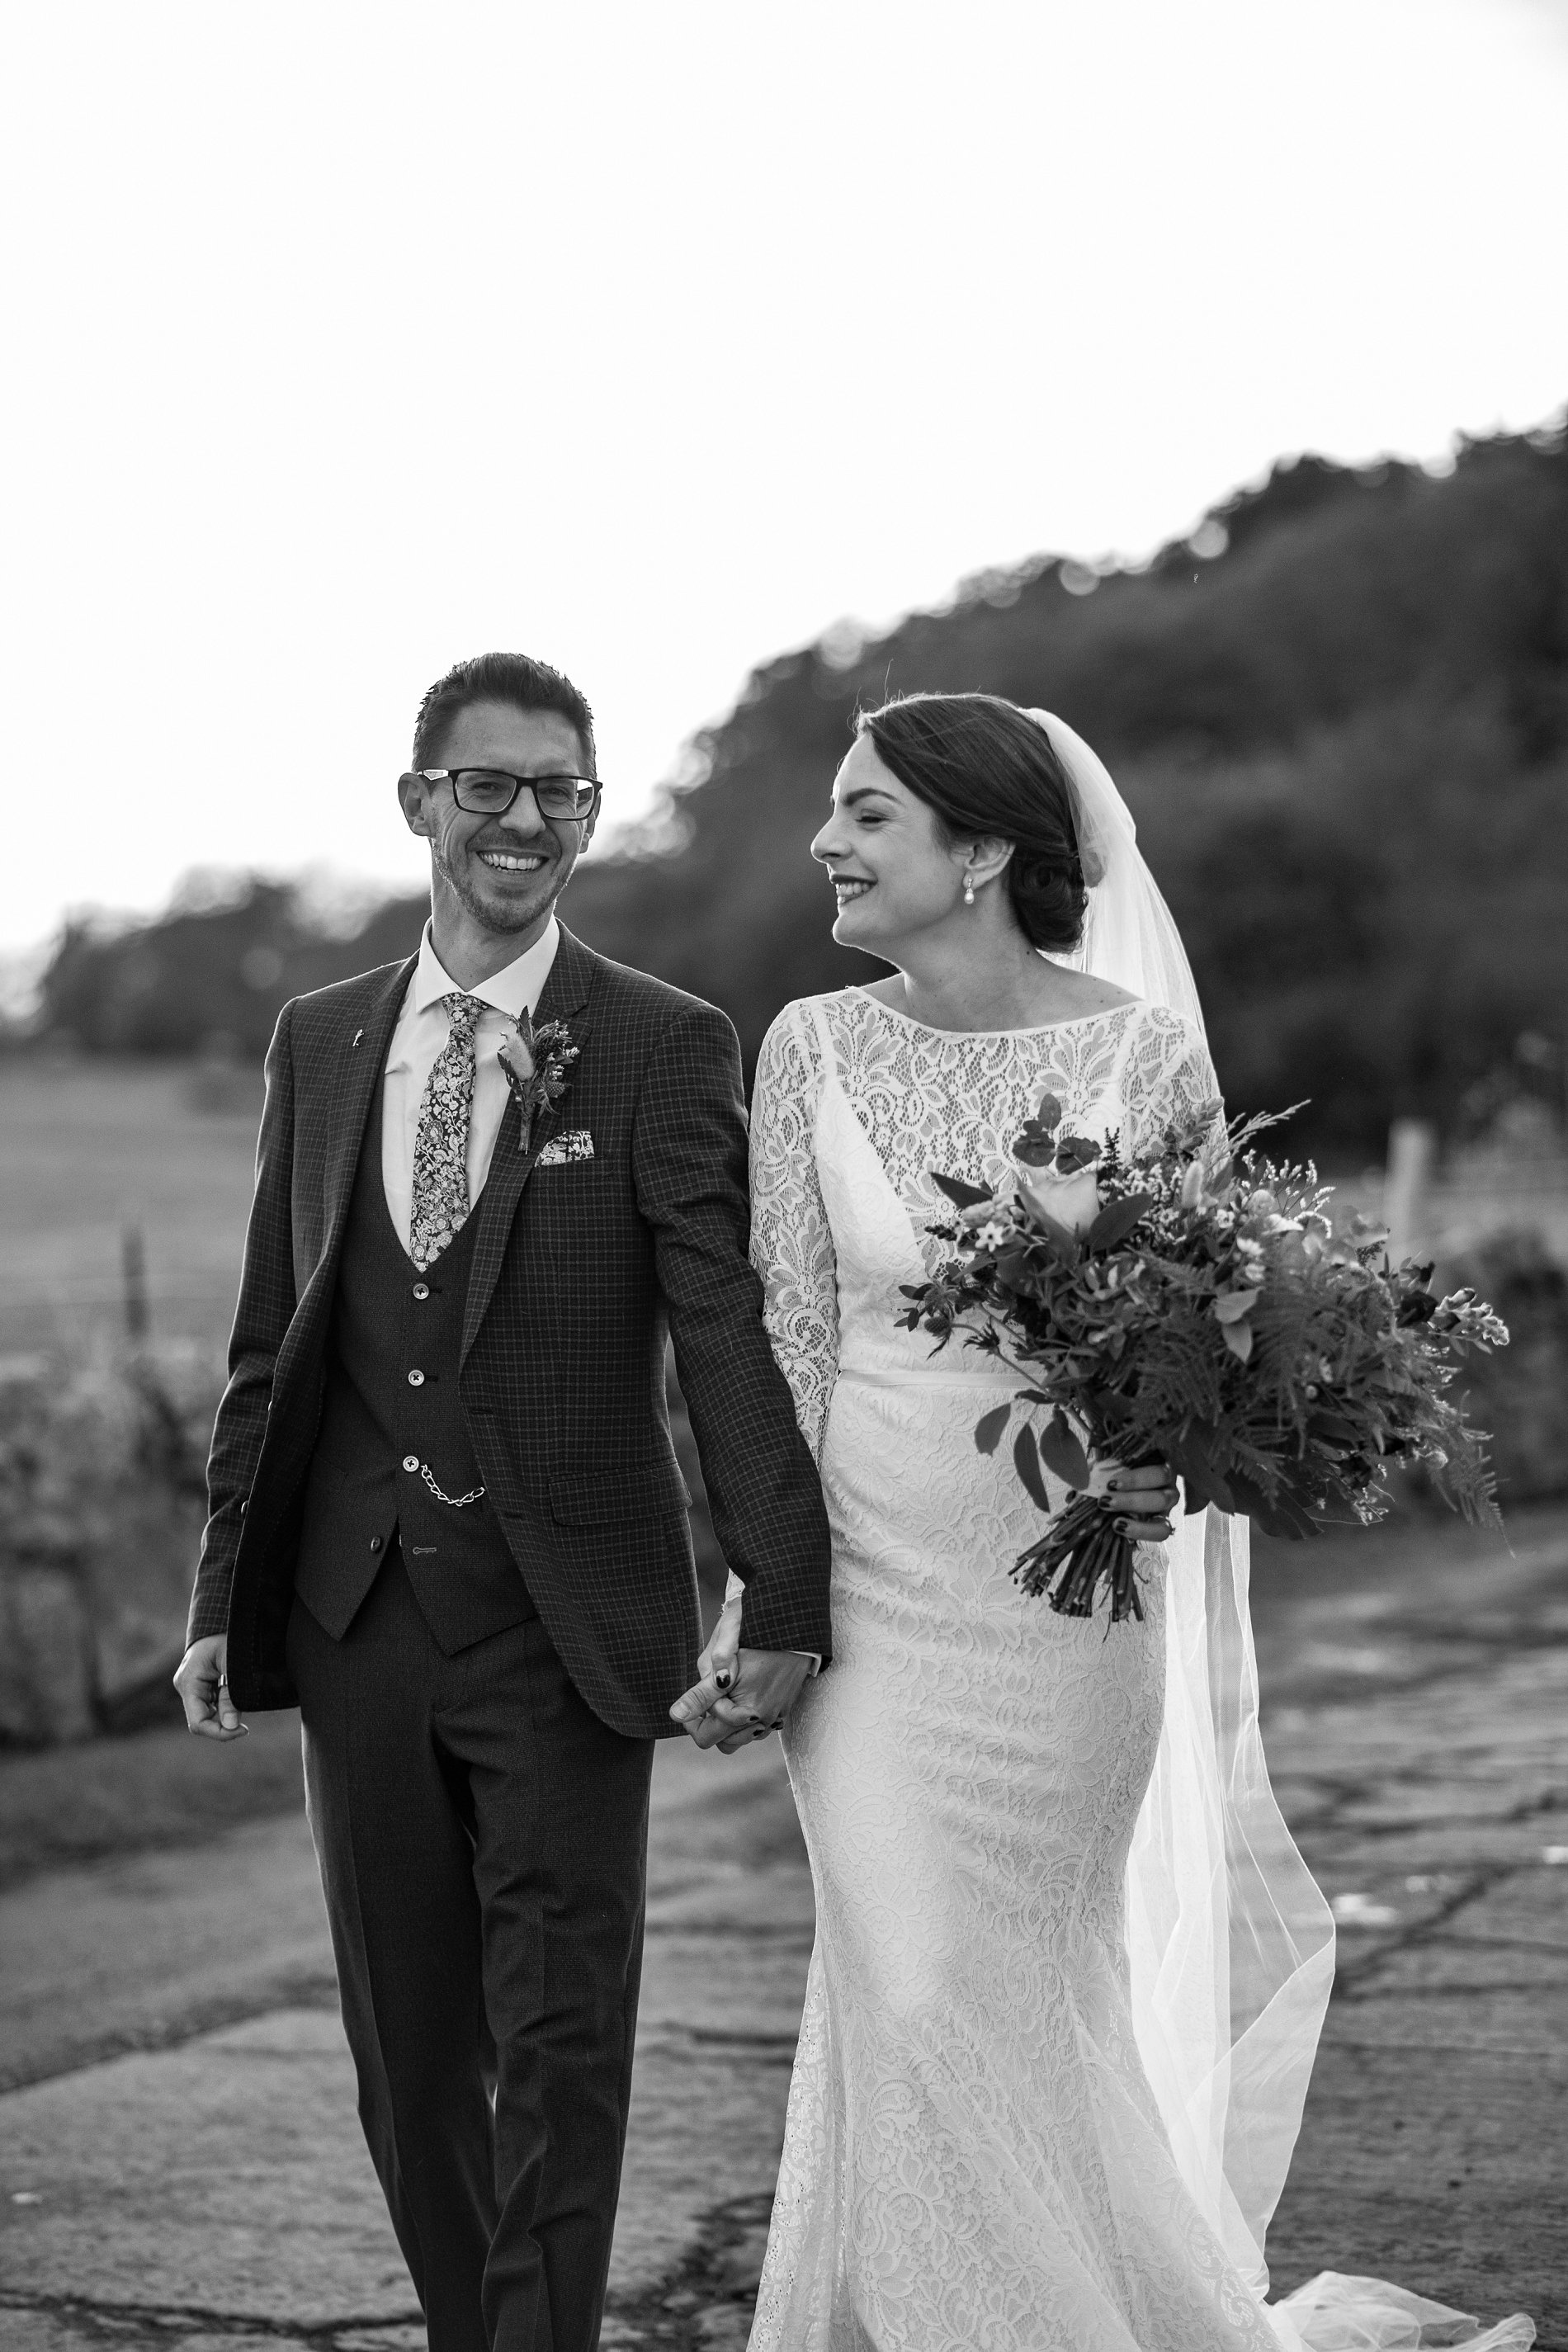 A Winter Wedding at Doxford Barns (c) Lee Scullion (105)